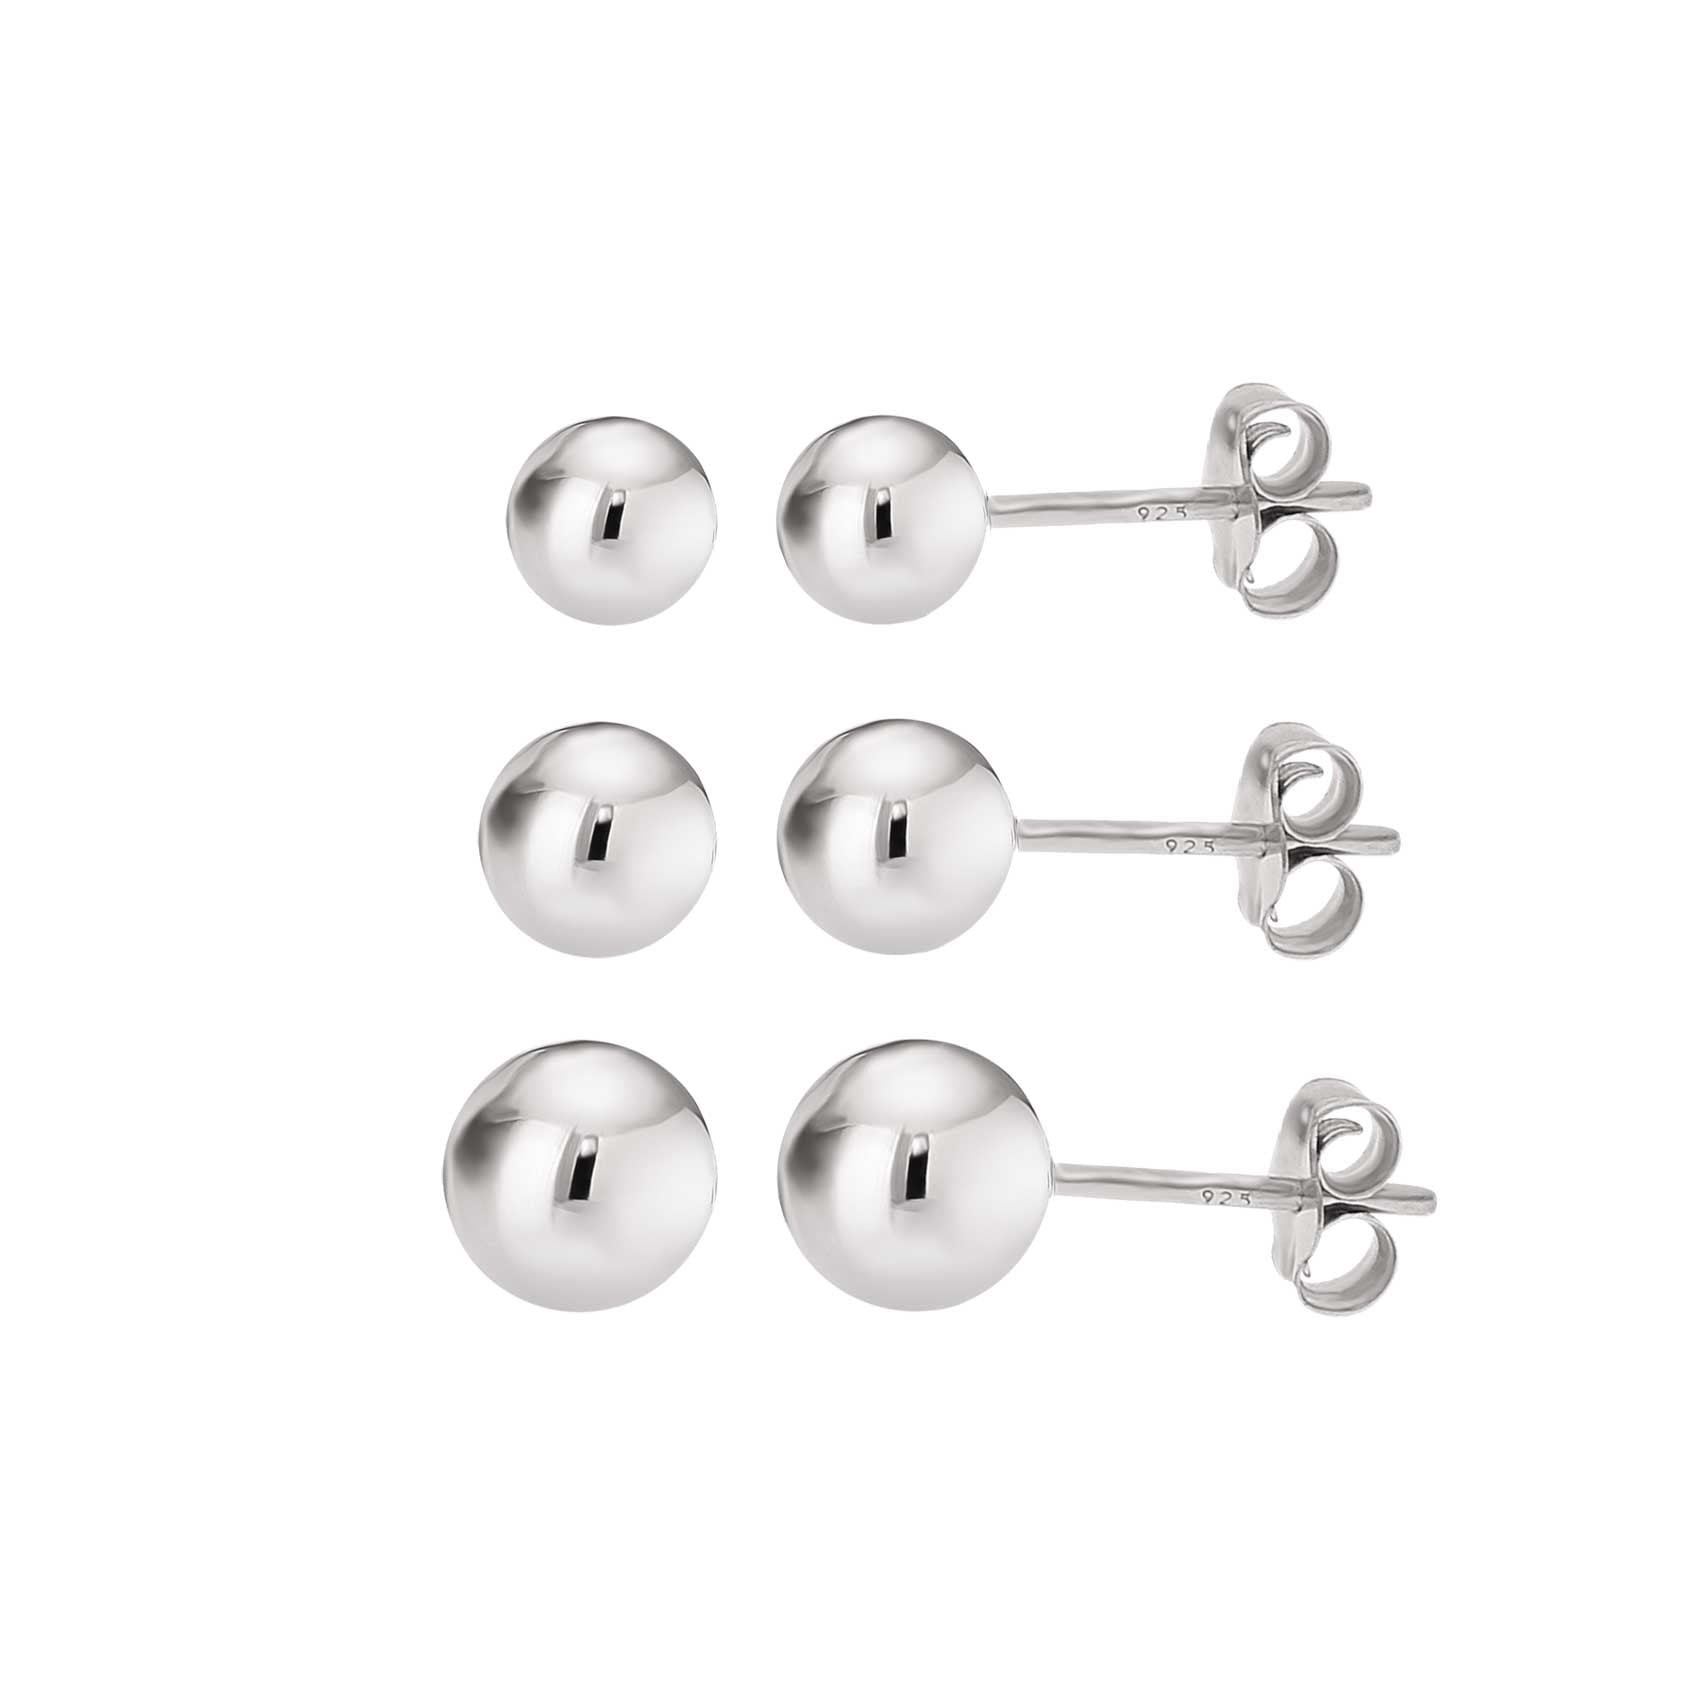 Kezef - 925 Sterling Silver High Polish Smooth Round Ball Stud Earring ...